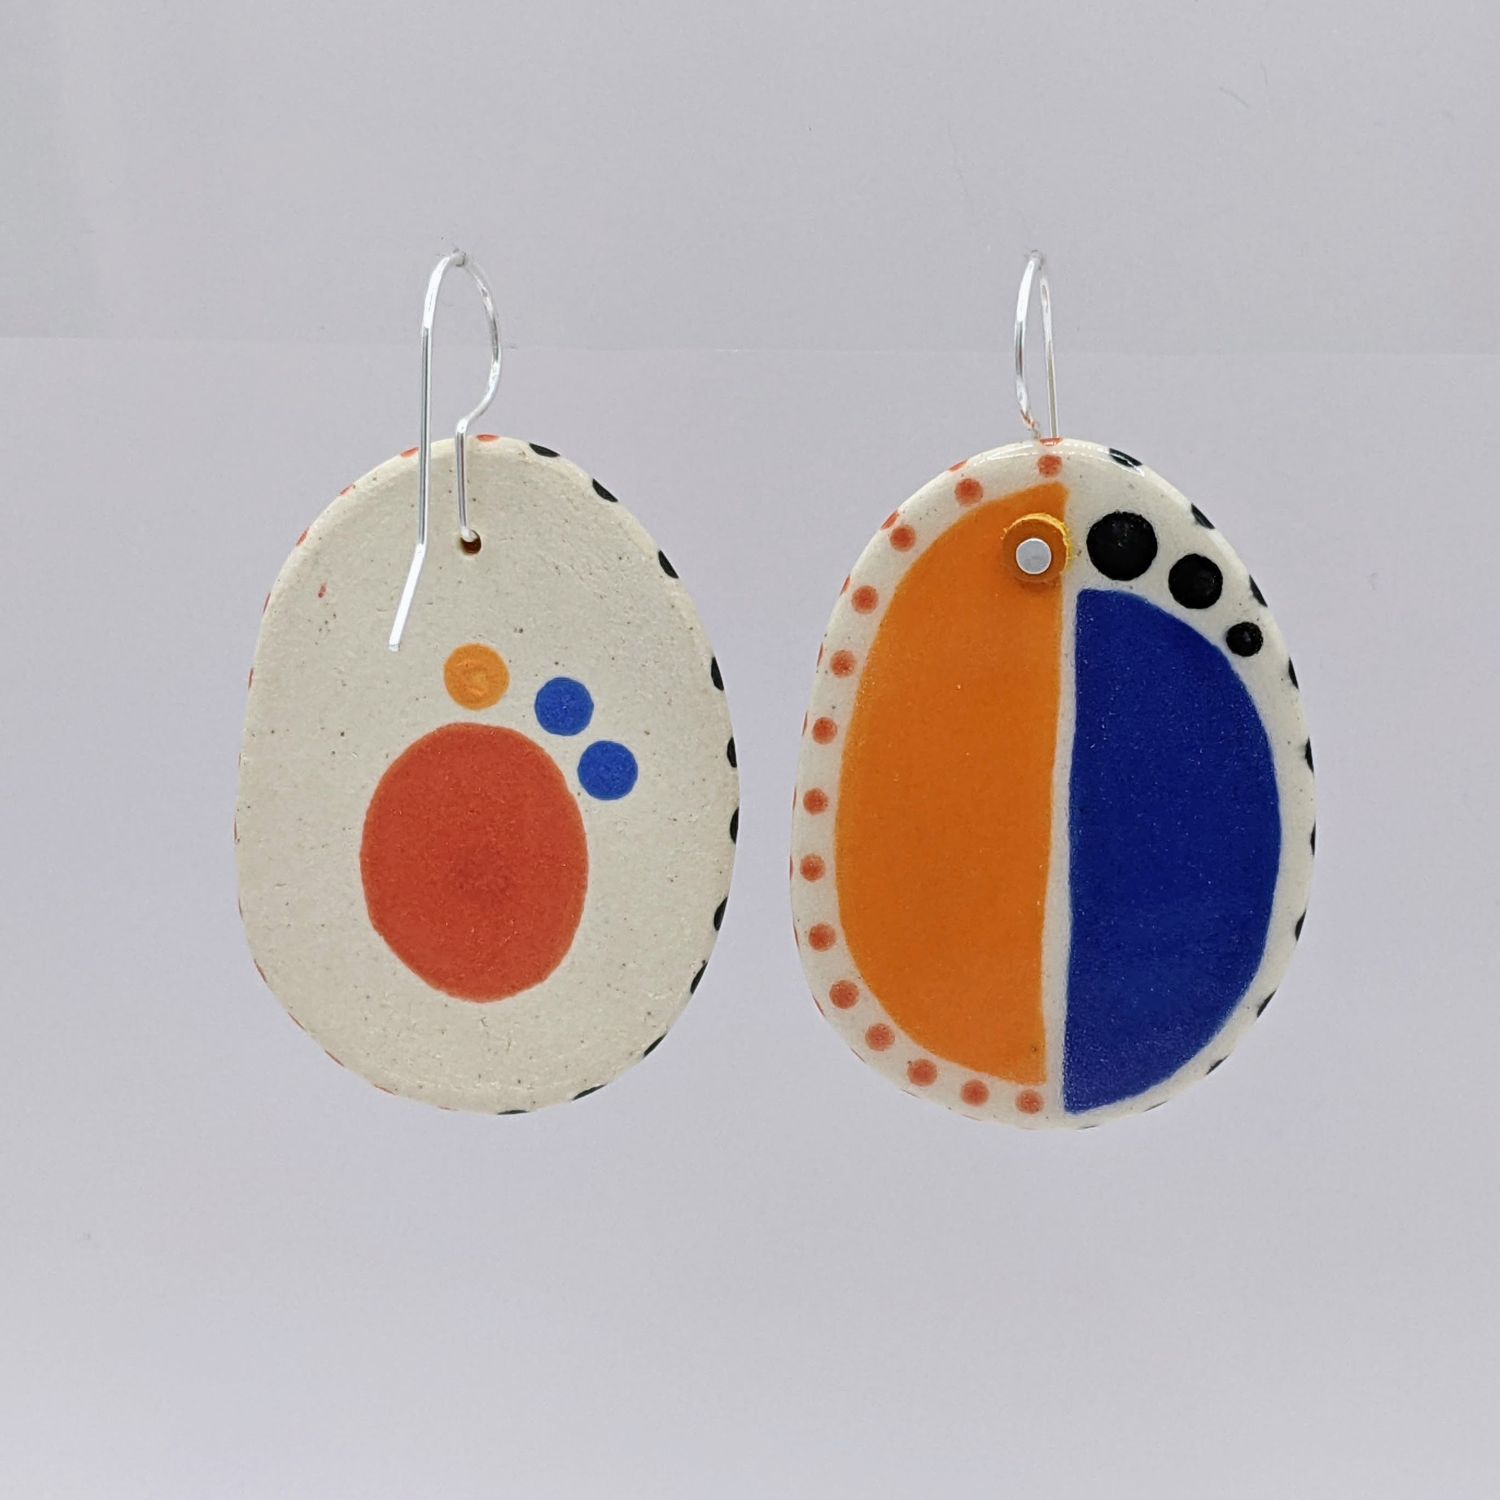 Here and Here: Half Blue and Half Orange Ceramic Disc Earrings Product Image 3 of 4